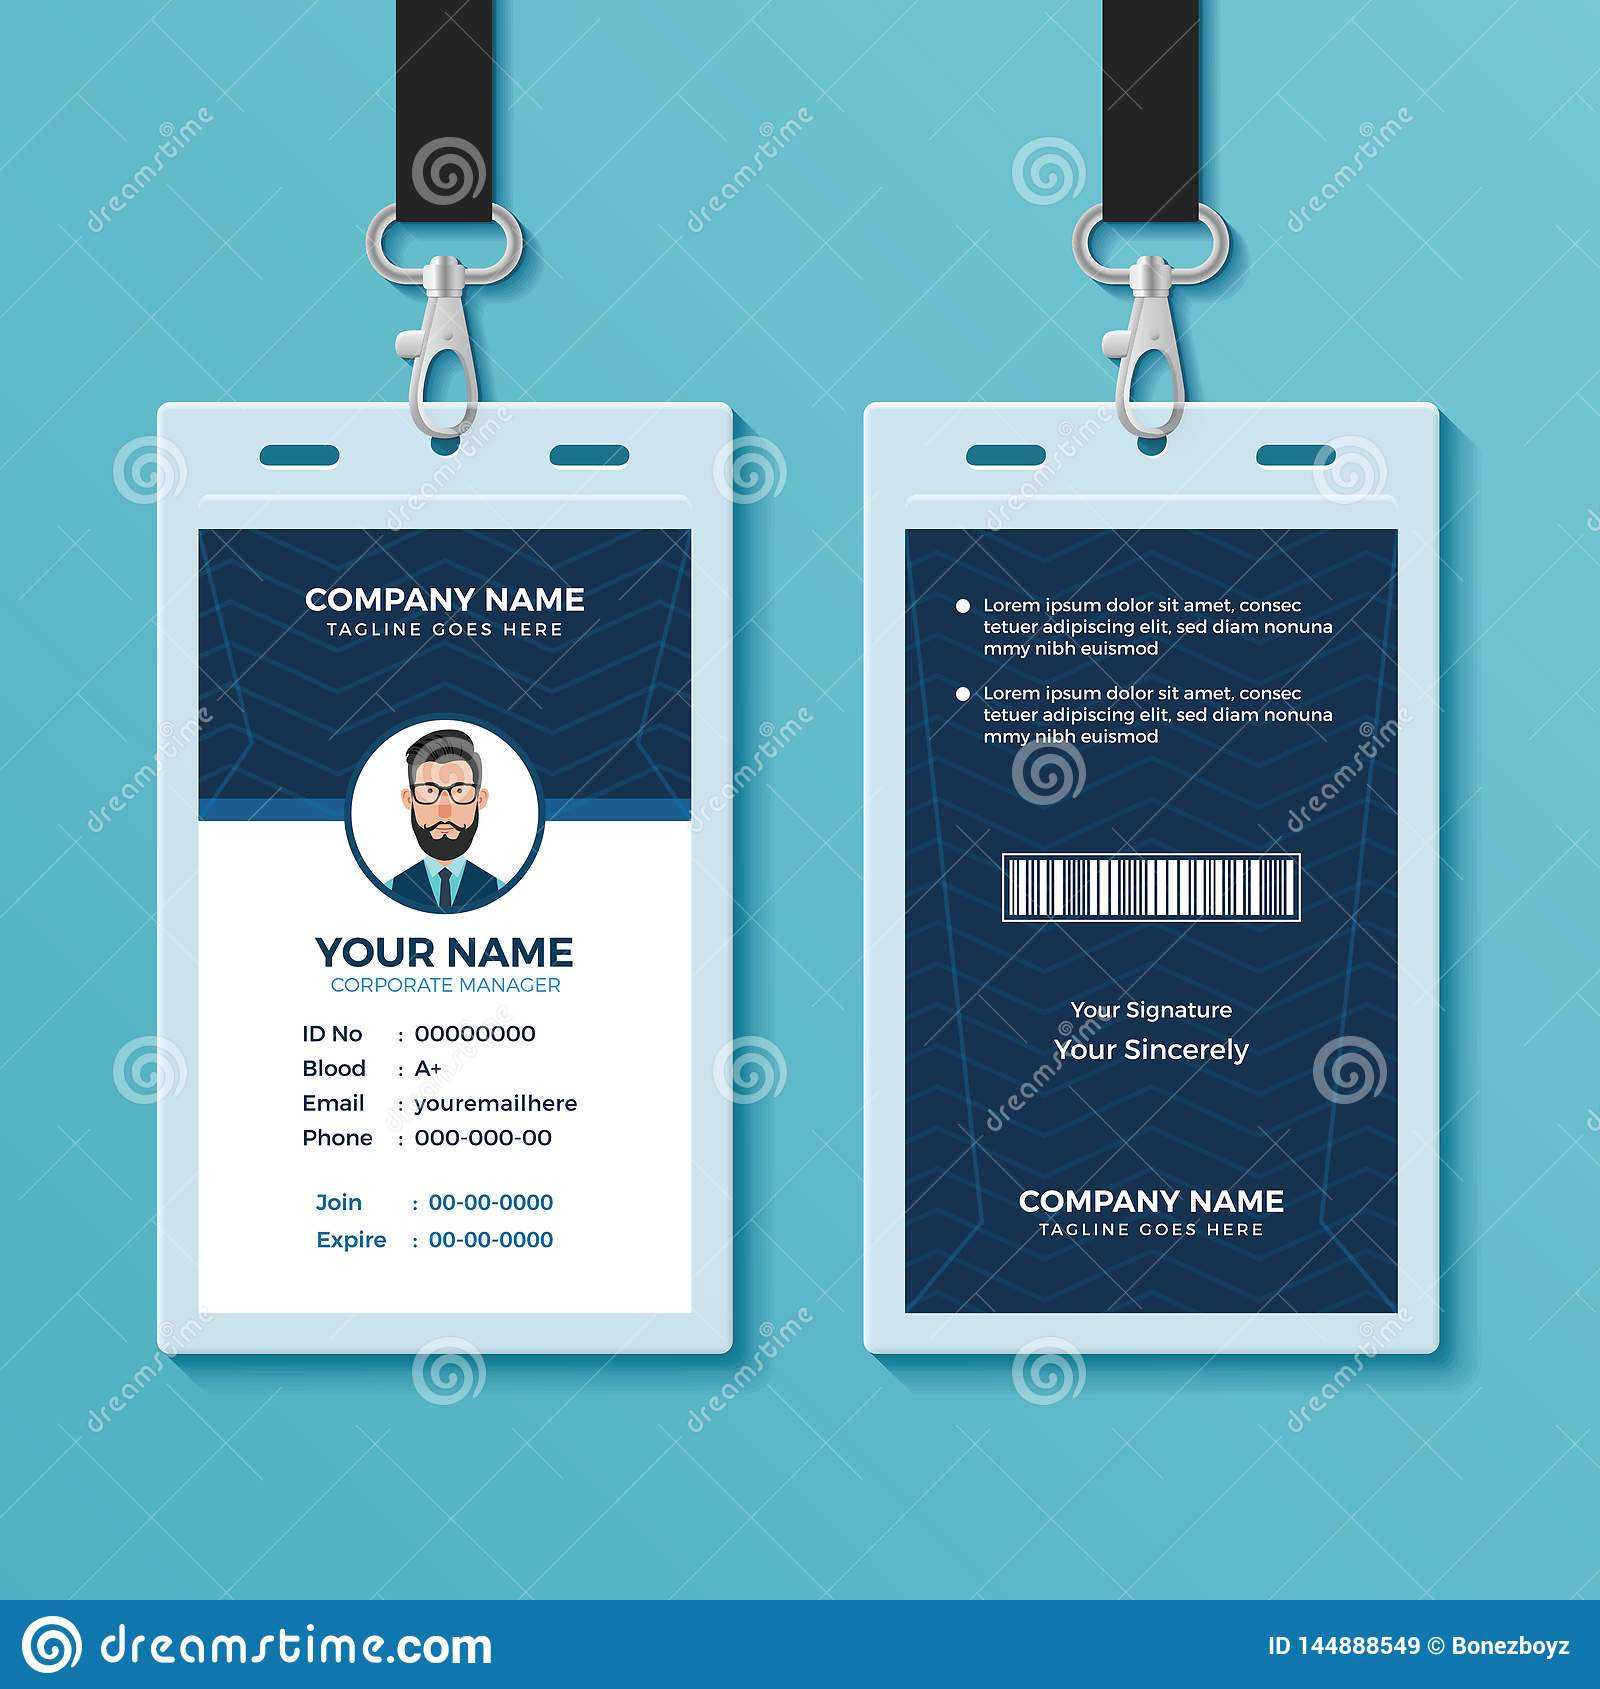 Modern And Clean Id Card Design Template Stock Vector Pertaining To Company Id Card Design Template